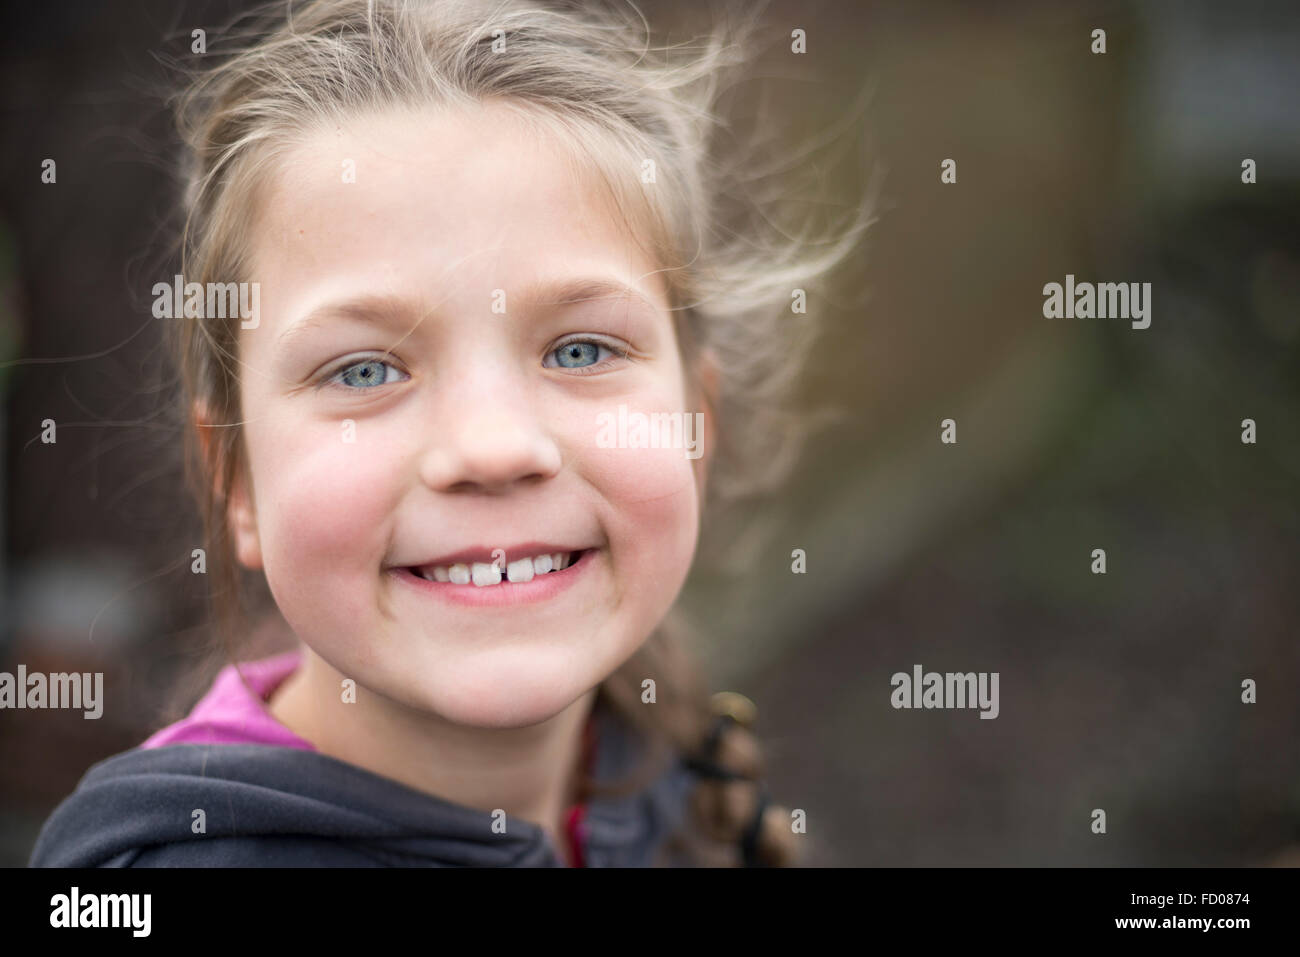 Portrait of happy child girl smiling outdoor Banque D'Images